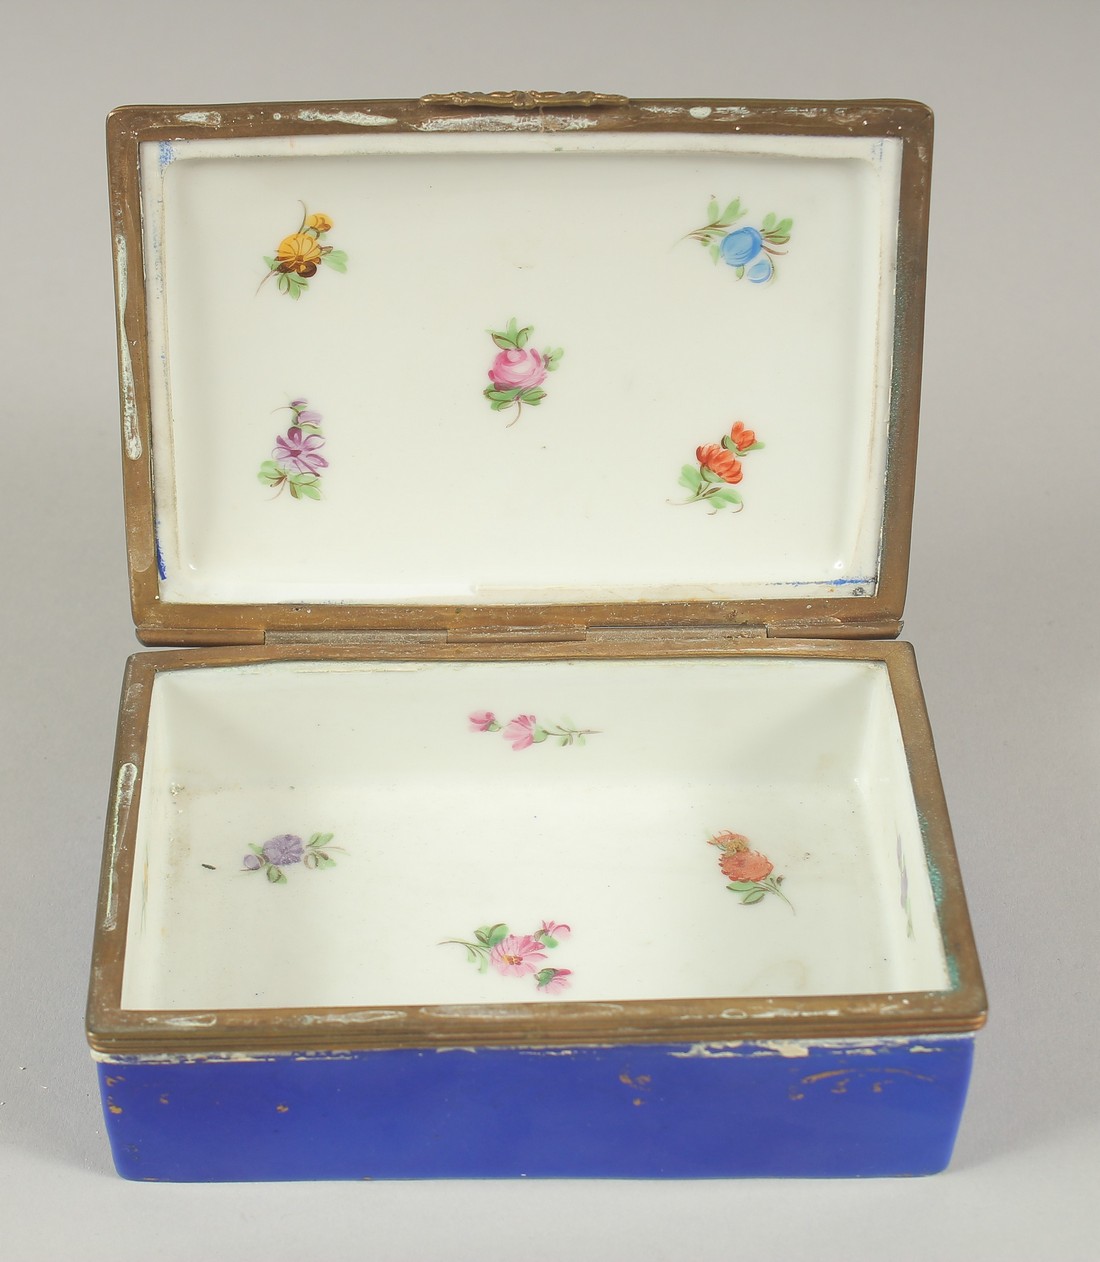 A SEVRES PORCELAIN BOX AND COVER with blue ground, with a panel of flowers. 5ins long. - Image 3 of 6